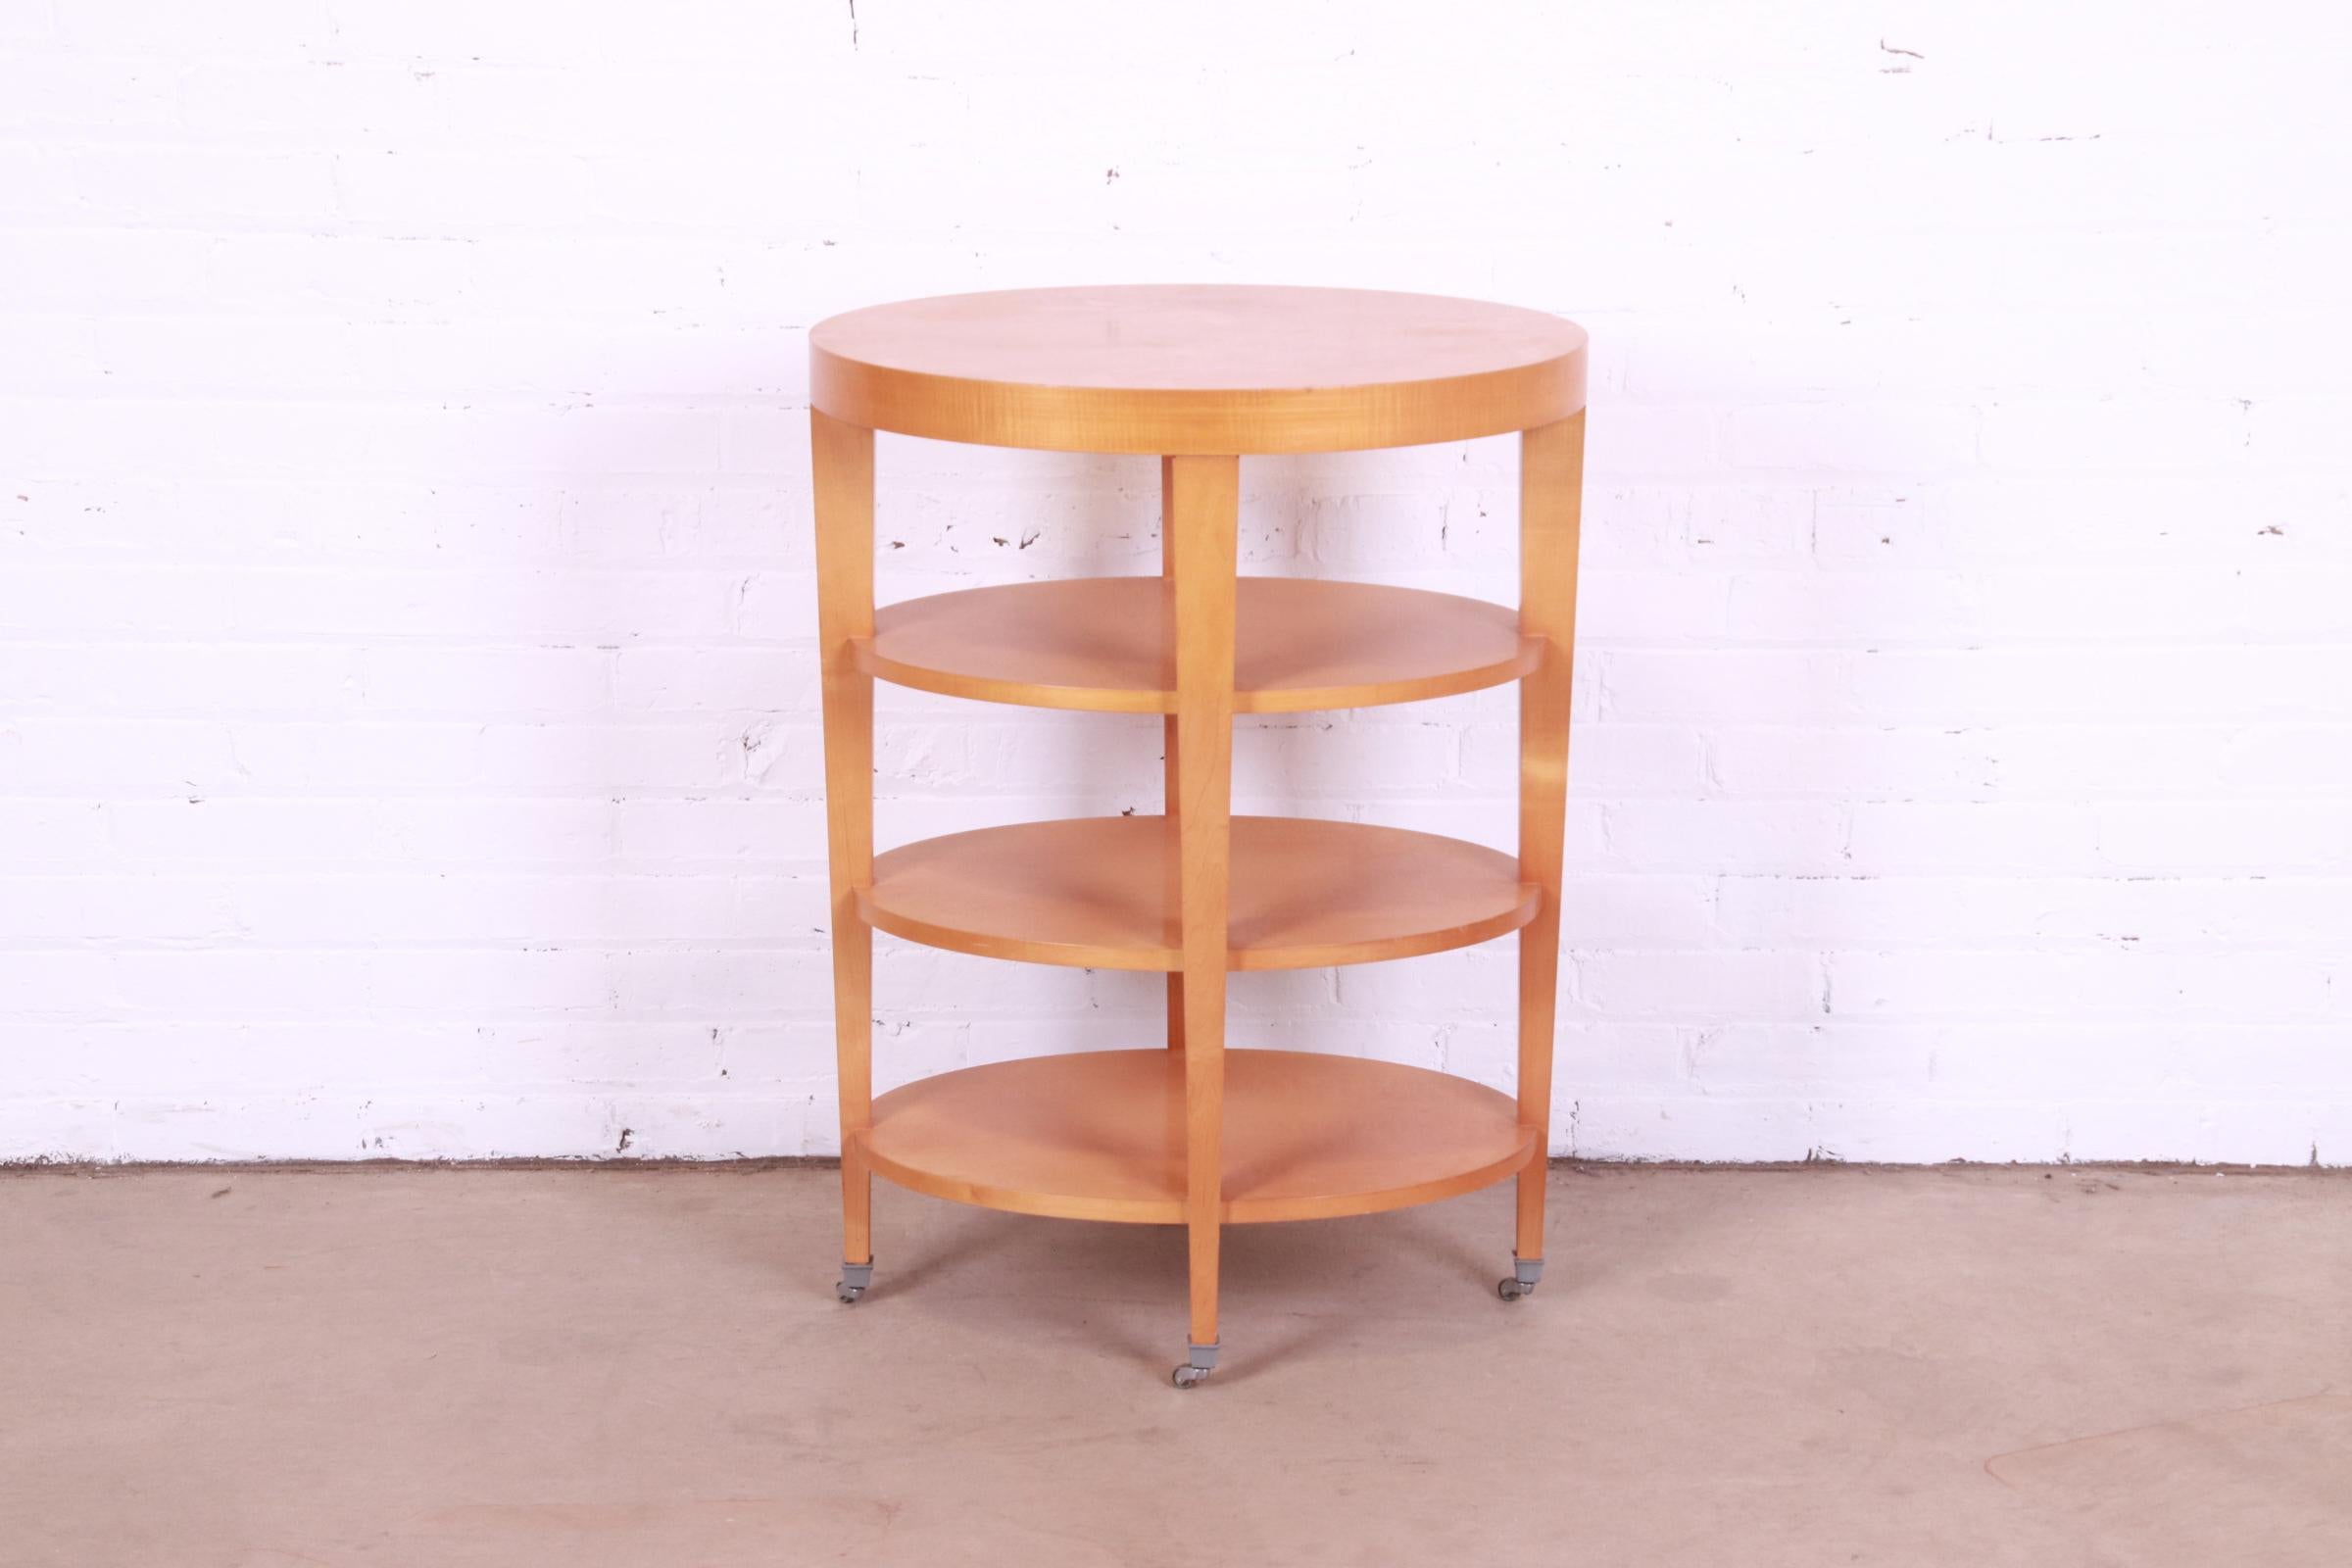 A gorgeous Modern Art Deco style four-tier maple tea table or occasional side table on casters

By Baker Furniture

USA, Late 20th Century

Measures: 24